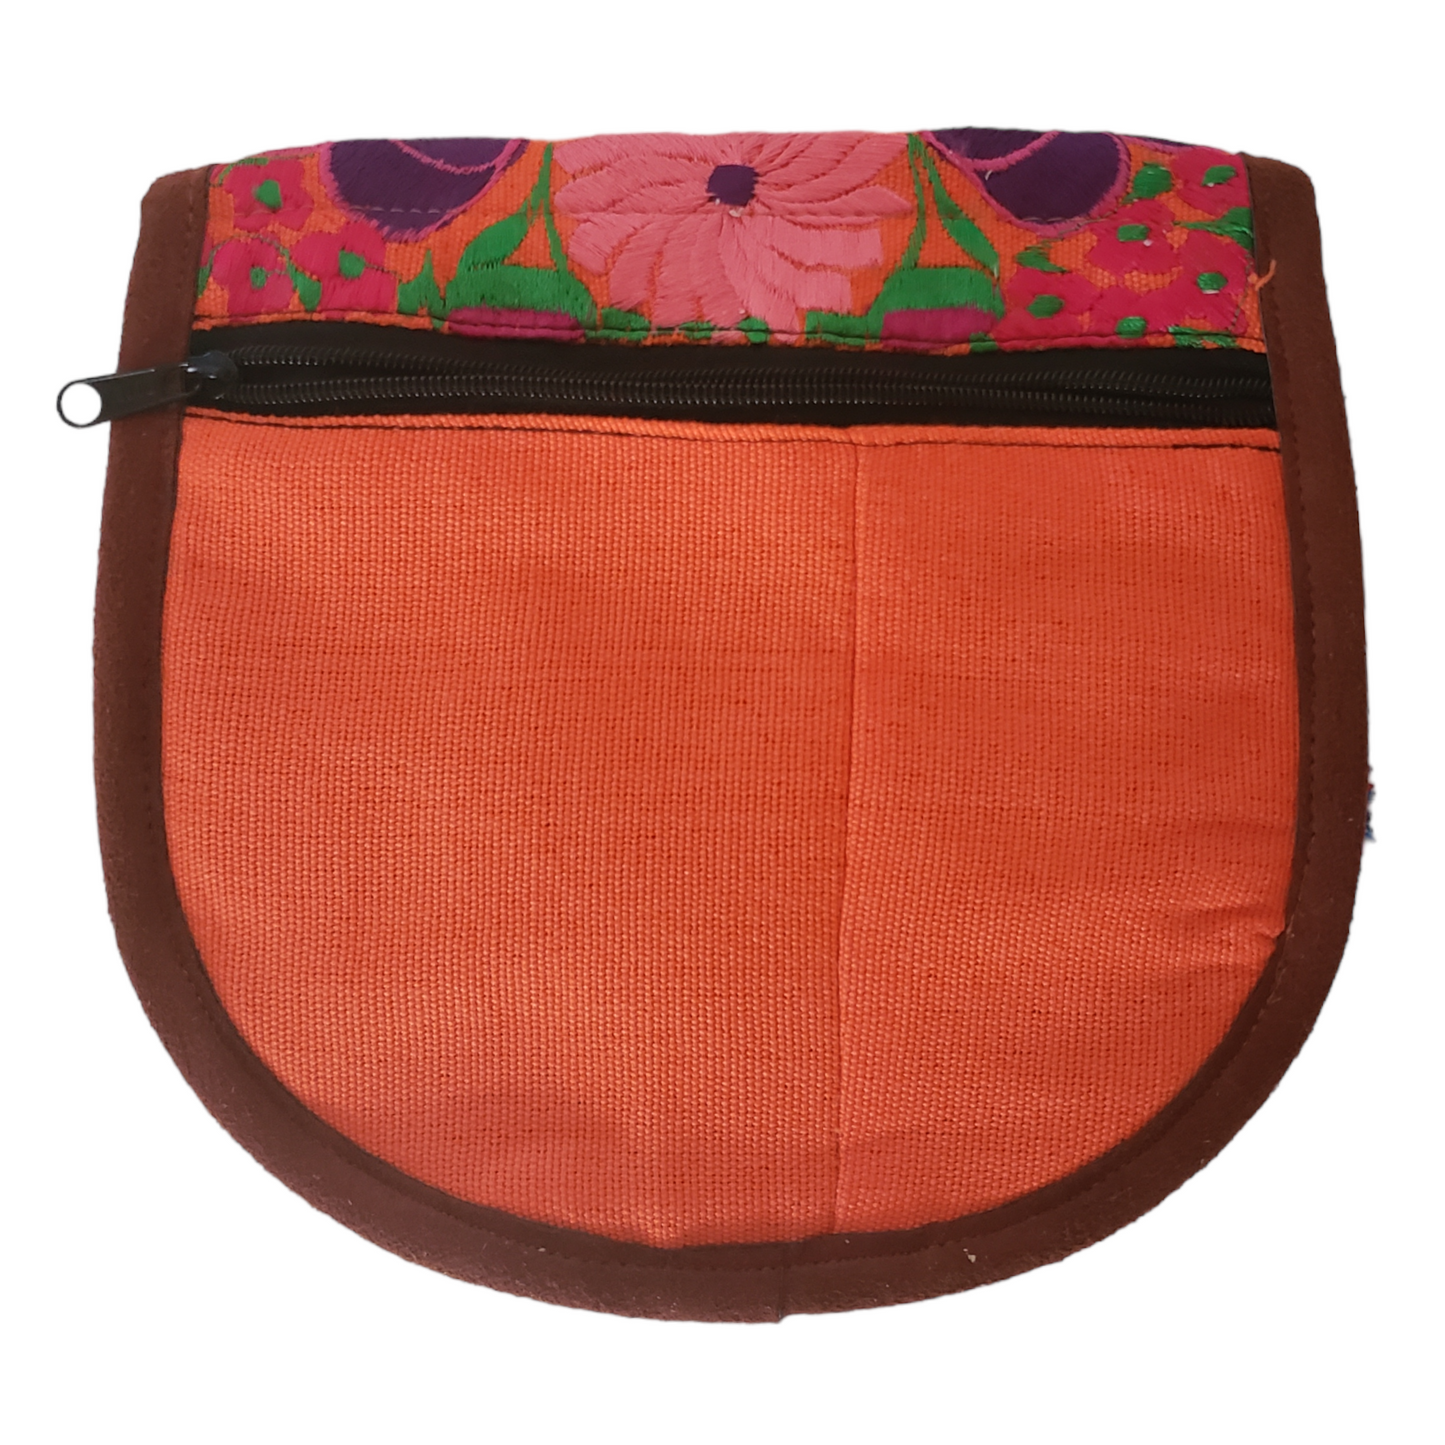 Mexican Embroidered Floral Bag Shoulder Crossbody